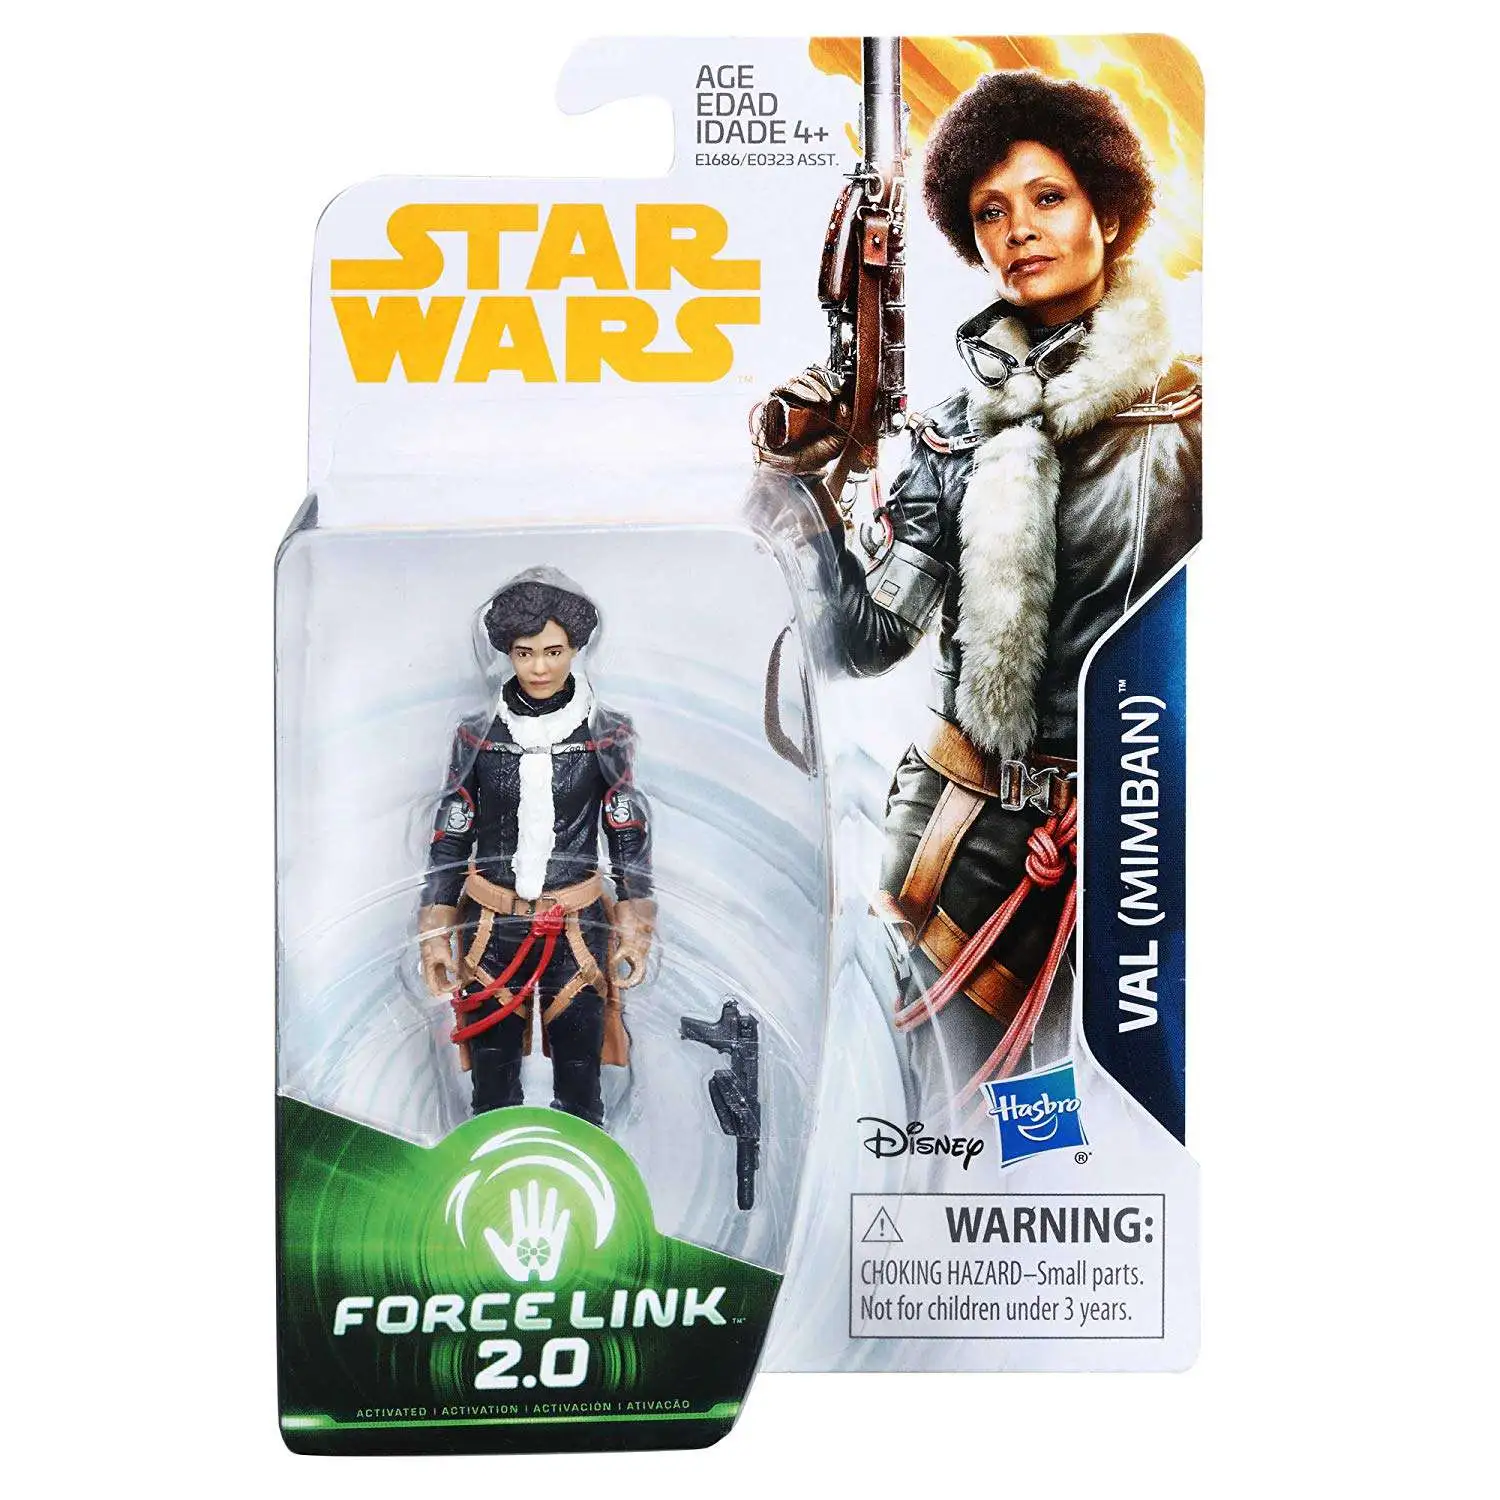 R 8600 STAR WARS FORCE LINK 2.0 MIMBAN VAL FIGURINE SERIE SOLO 2018 